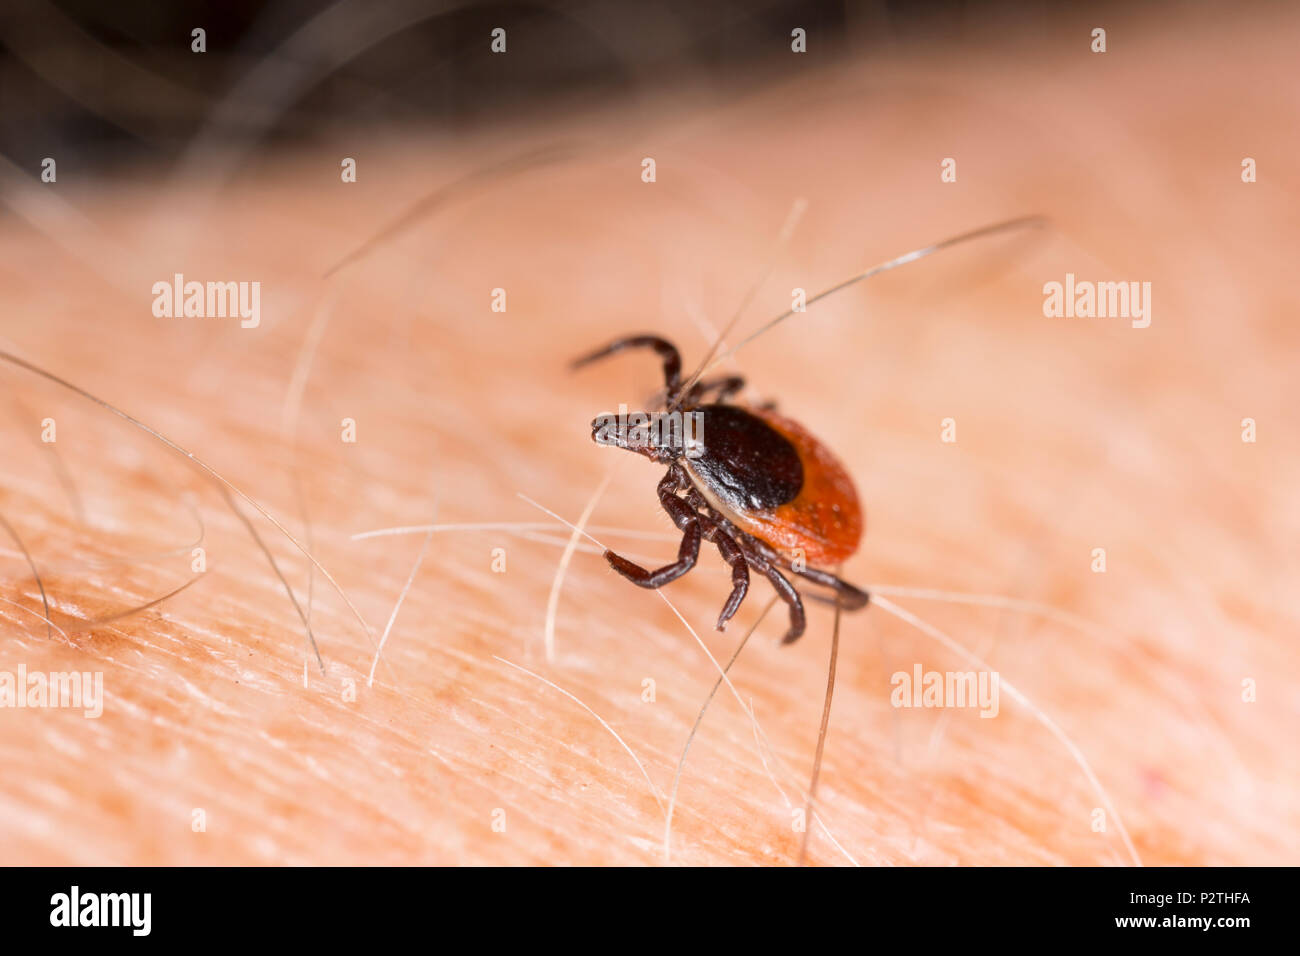 A female tick, Ixodes ricinus, crawling on a human arm. It was found in an area where deer and other mammals are present. This tick is also known as a Stock Photo